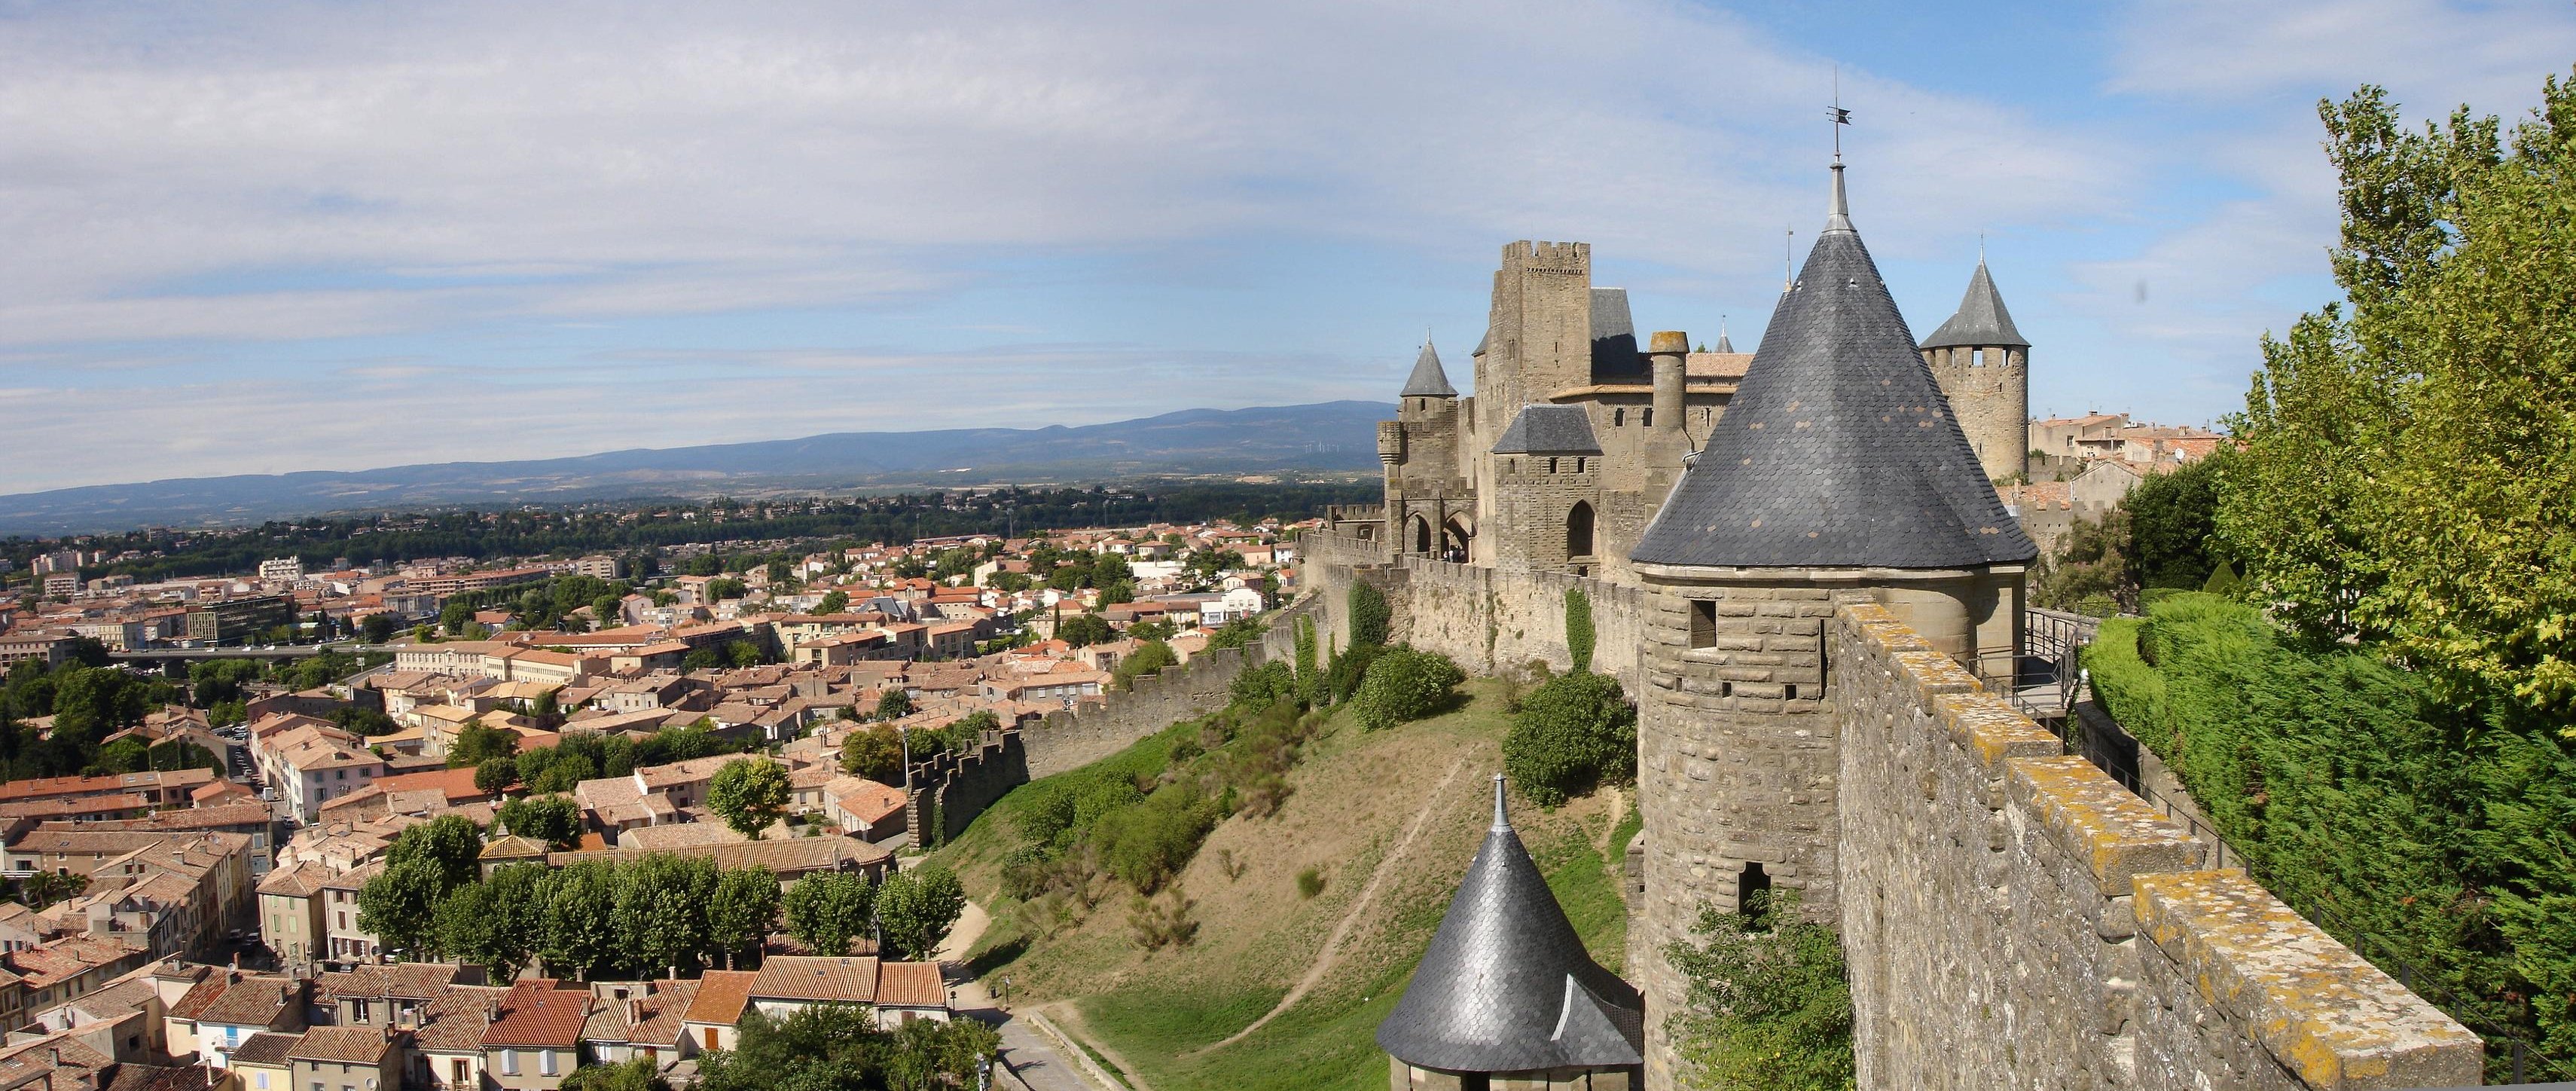 Nice Images Collection: Carcassonne Desktop Wallpapers